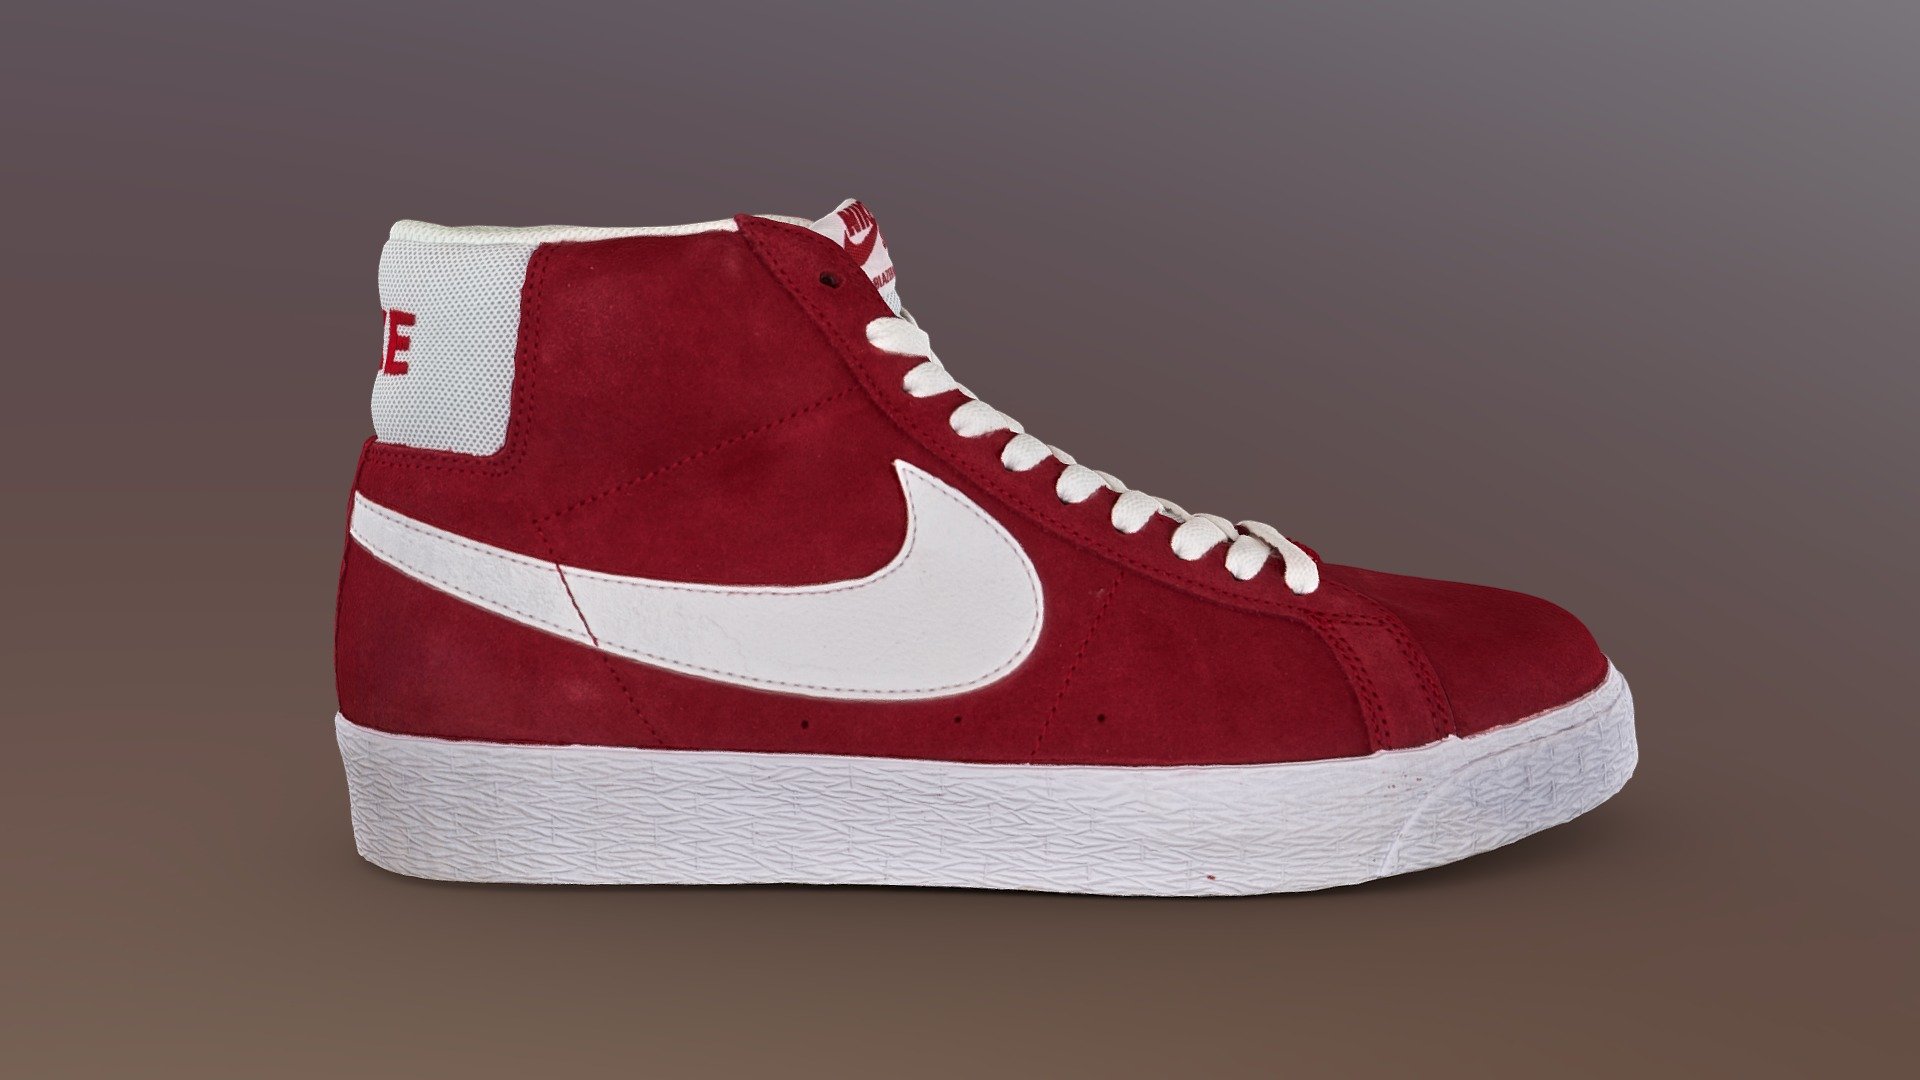 Single camera, turntable 3D-scanned skateboarding sneaker

Retopologized to efficient quads, UVs and re-projected texture

All textures are 8192x8192 pixels - Nike SB Zoom Blazer - Buy Royalty Free 3D model by omegadarling 3d model